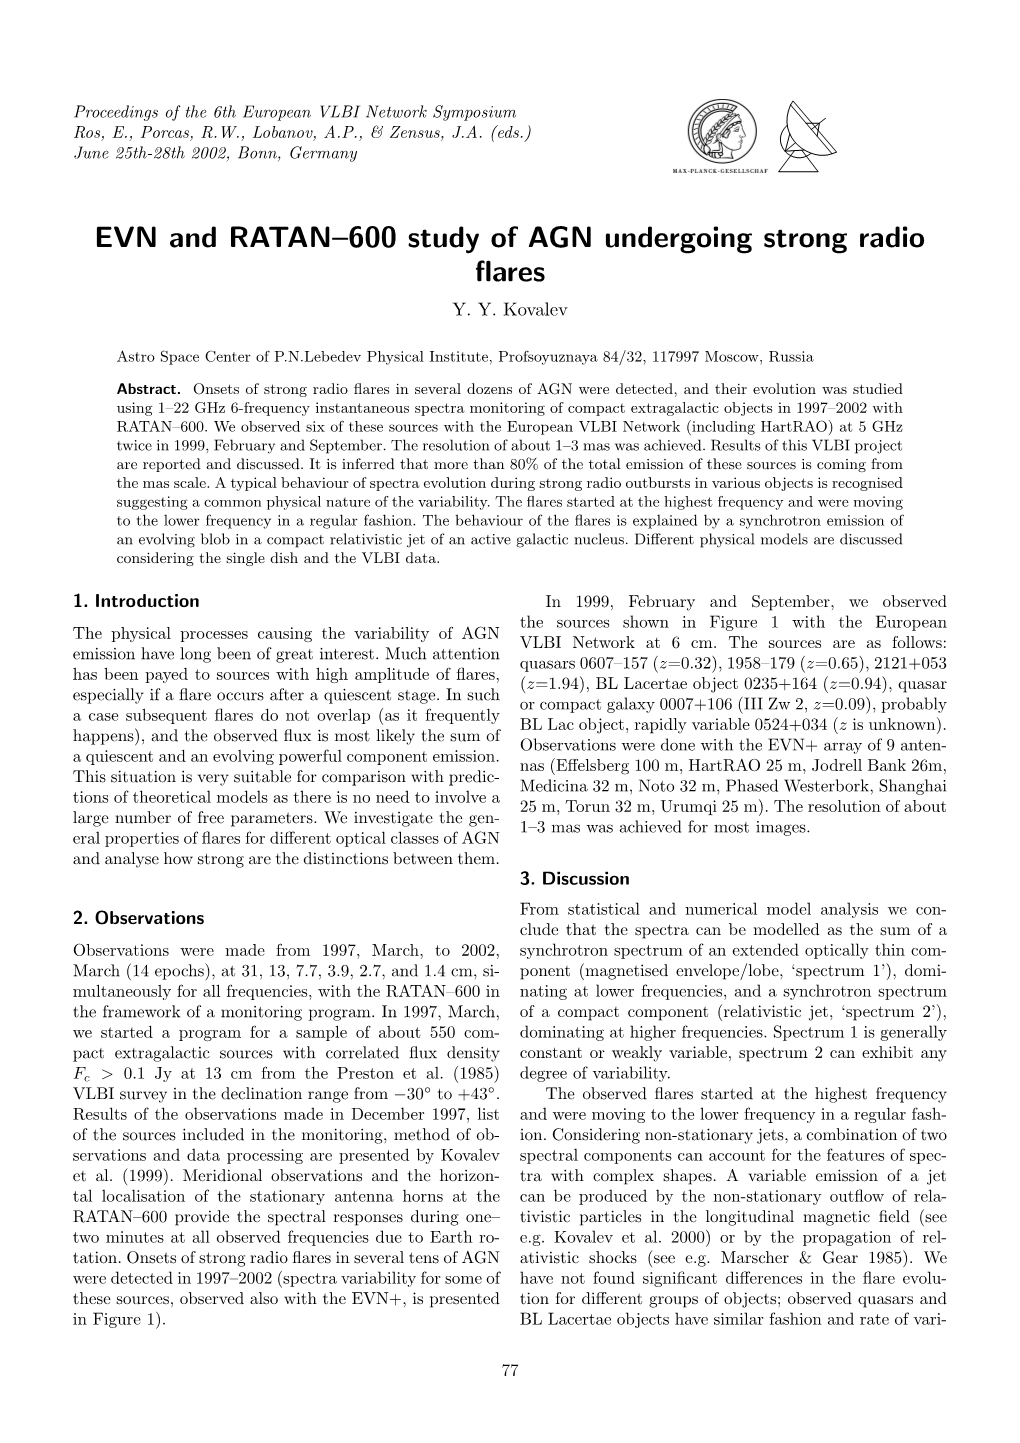 EVN and RATAN–600 Study of AGN Undergoing Strong Radio Flares